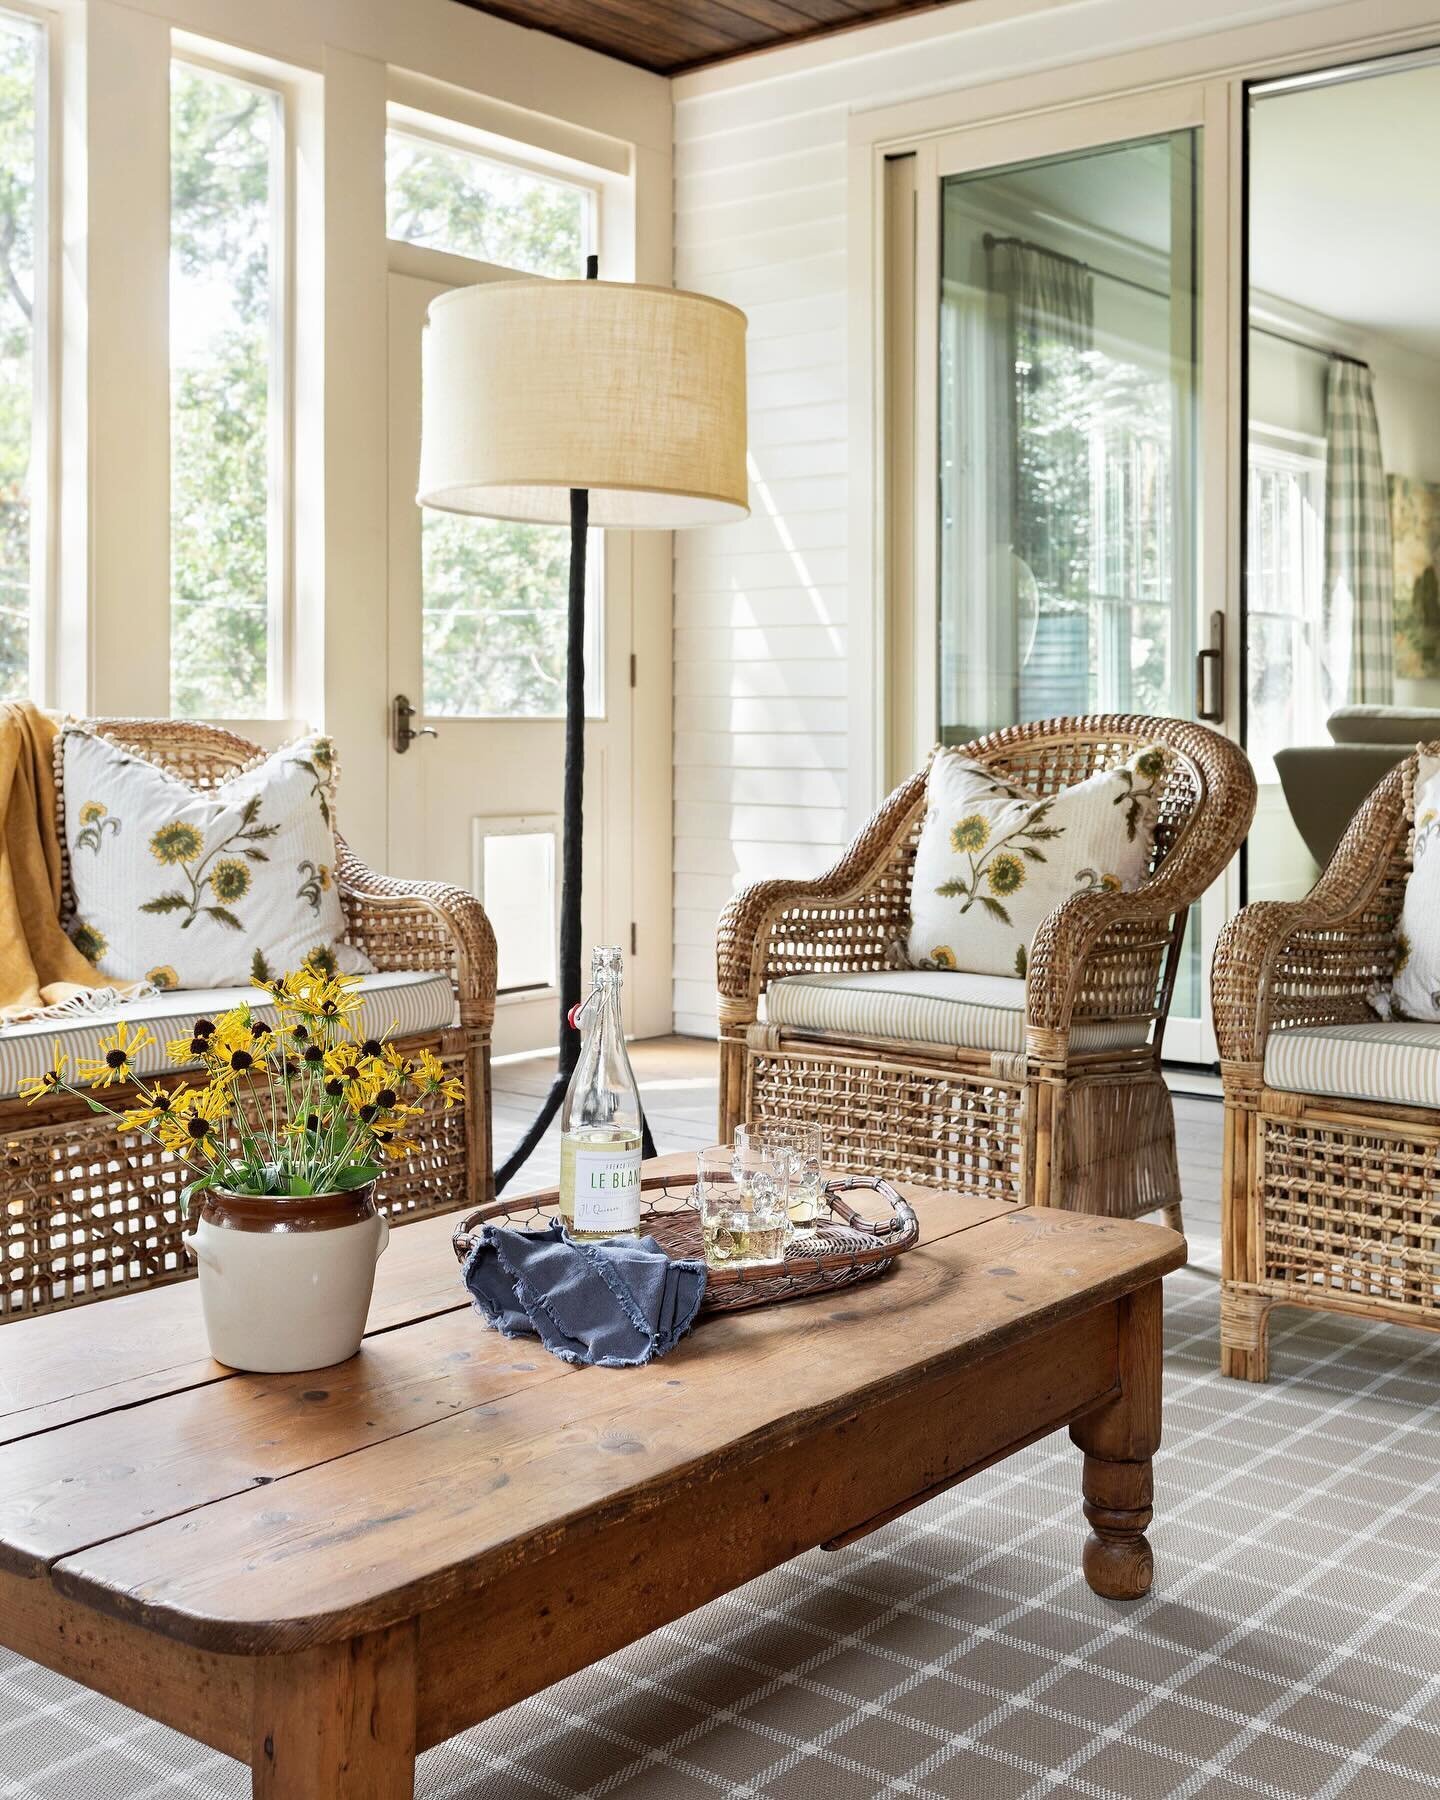 Feels good to be porch season again 🌼 Happy first day of spring! 🌱
.
📷: @carolinesharpnack 
Builder: The Magness Group
.
#catherinebranstetter #porch #porchdesign #southernporches #rattan #sisterparish #screenedporch #outdoorliving #southernliving